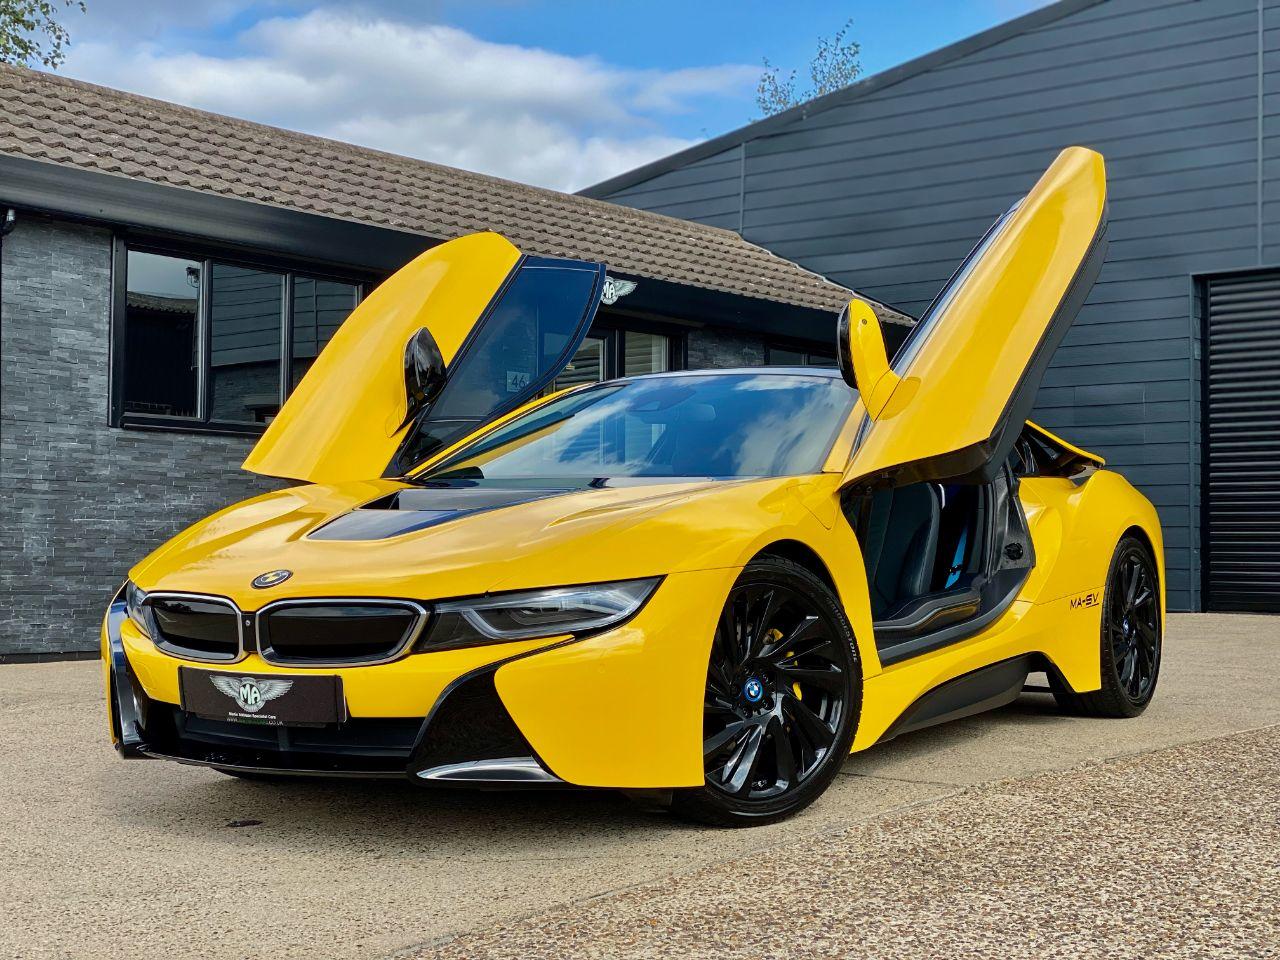 BMW I8 1.5 2dr Auto Coupe 4x4 Coupe Petrol / Electric Hybrid Yellow